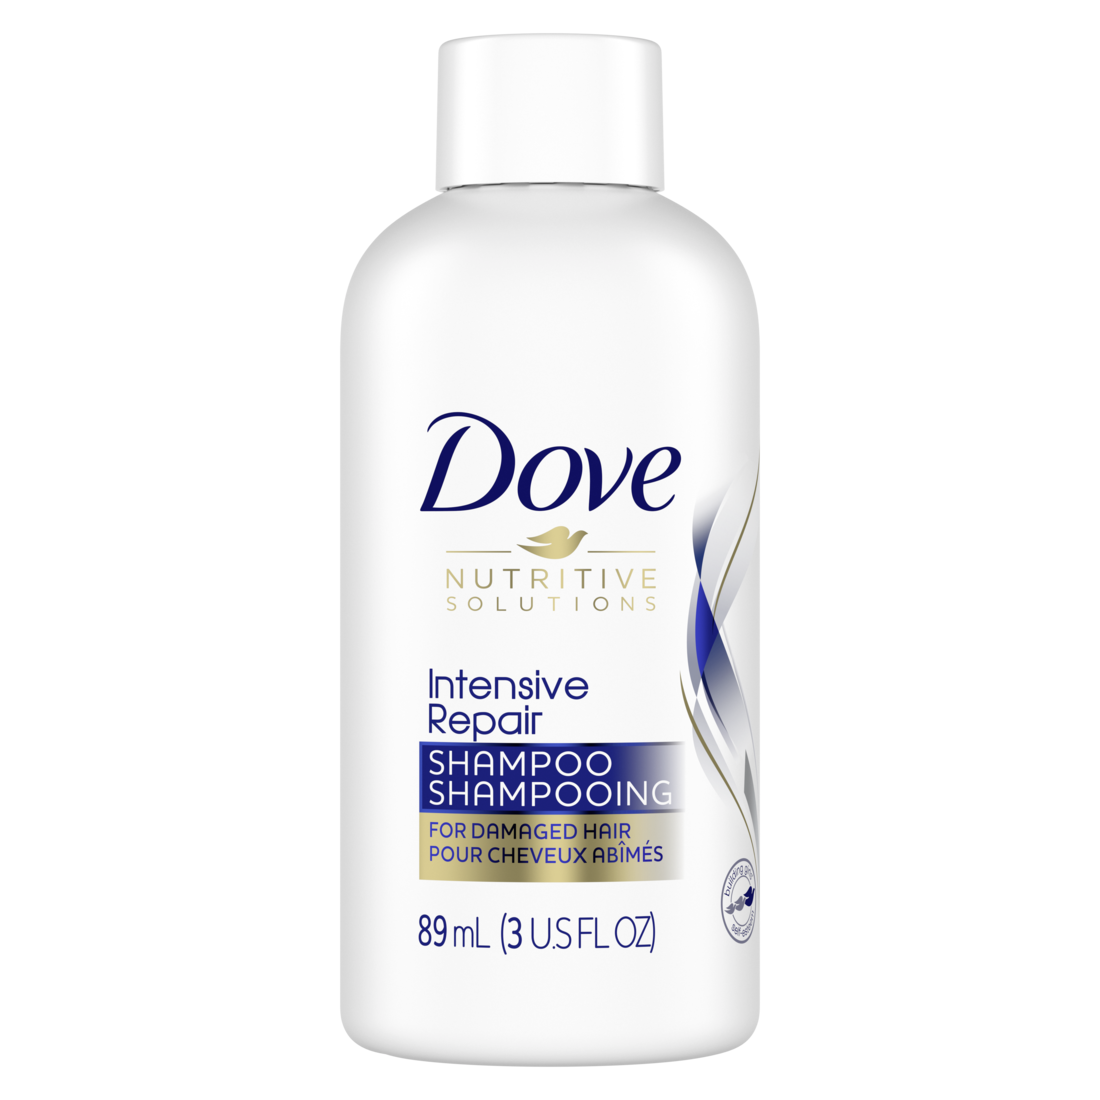 Displaying the front view of the Dove Intensive Repair Shampoo 89mL